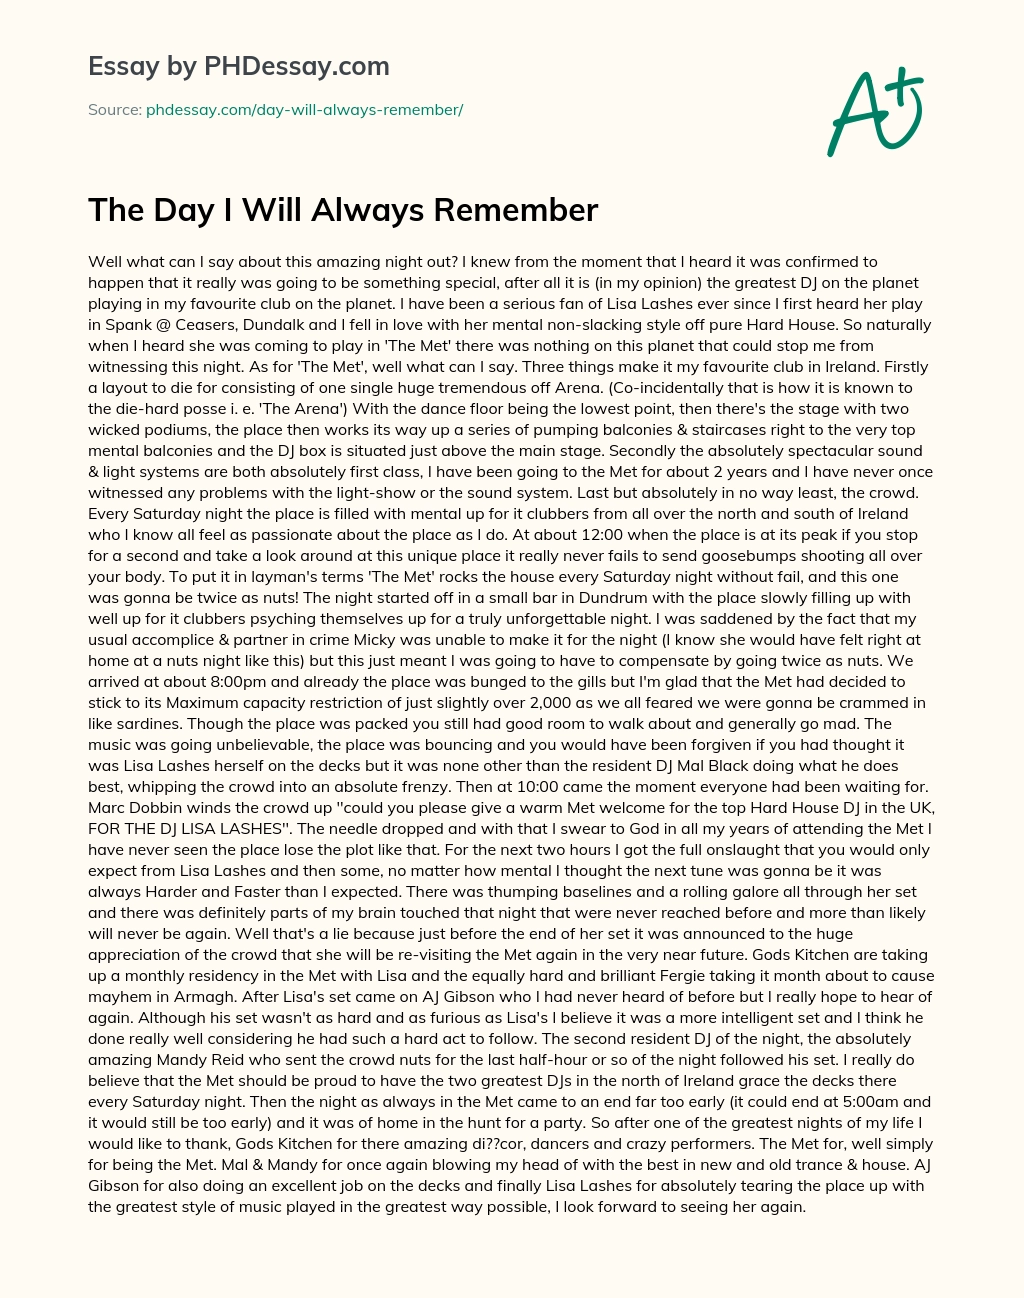 essay on a day i will always remember